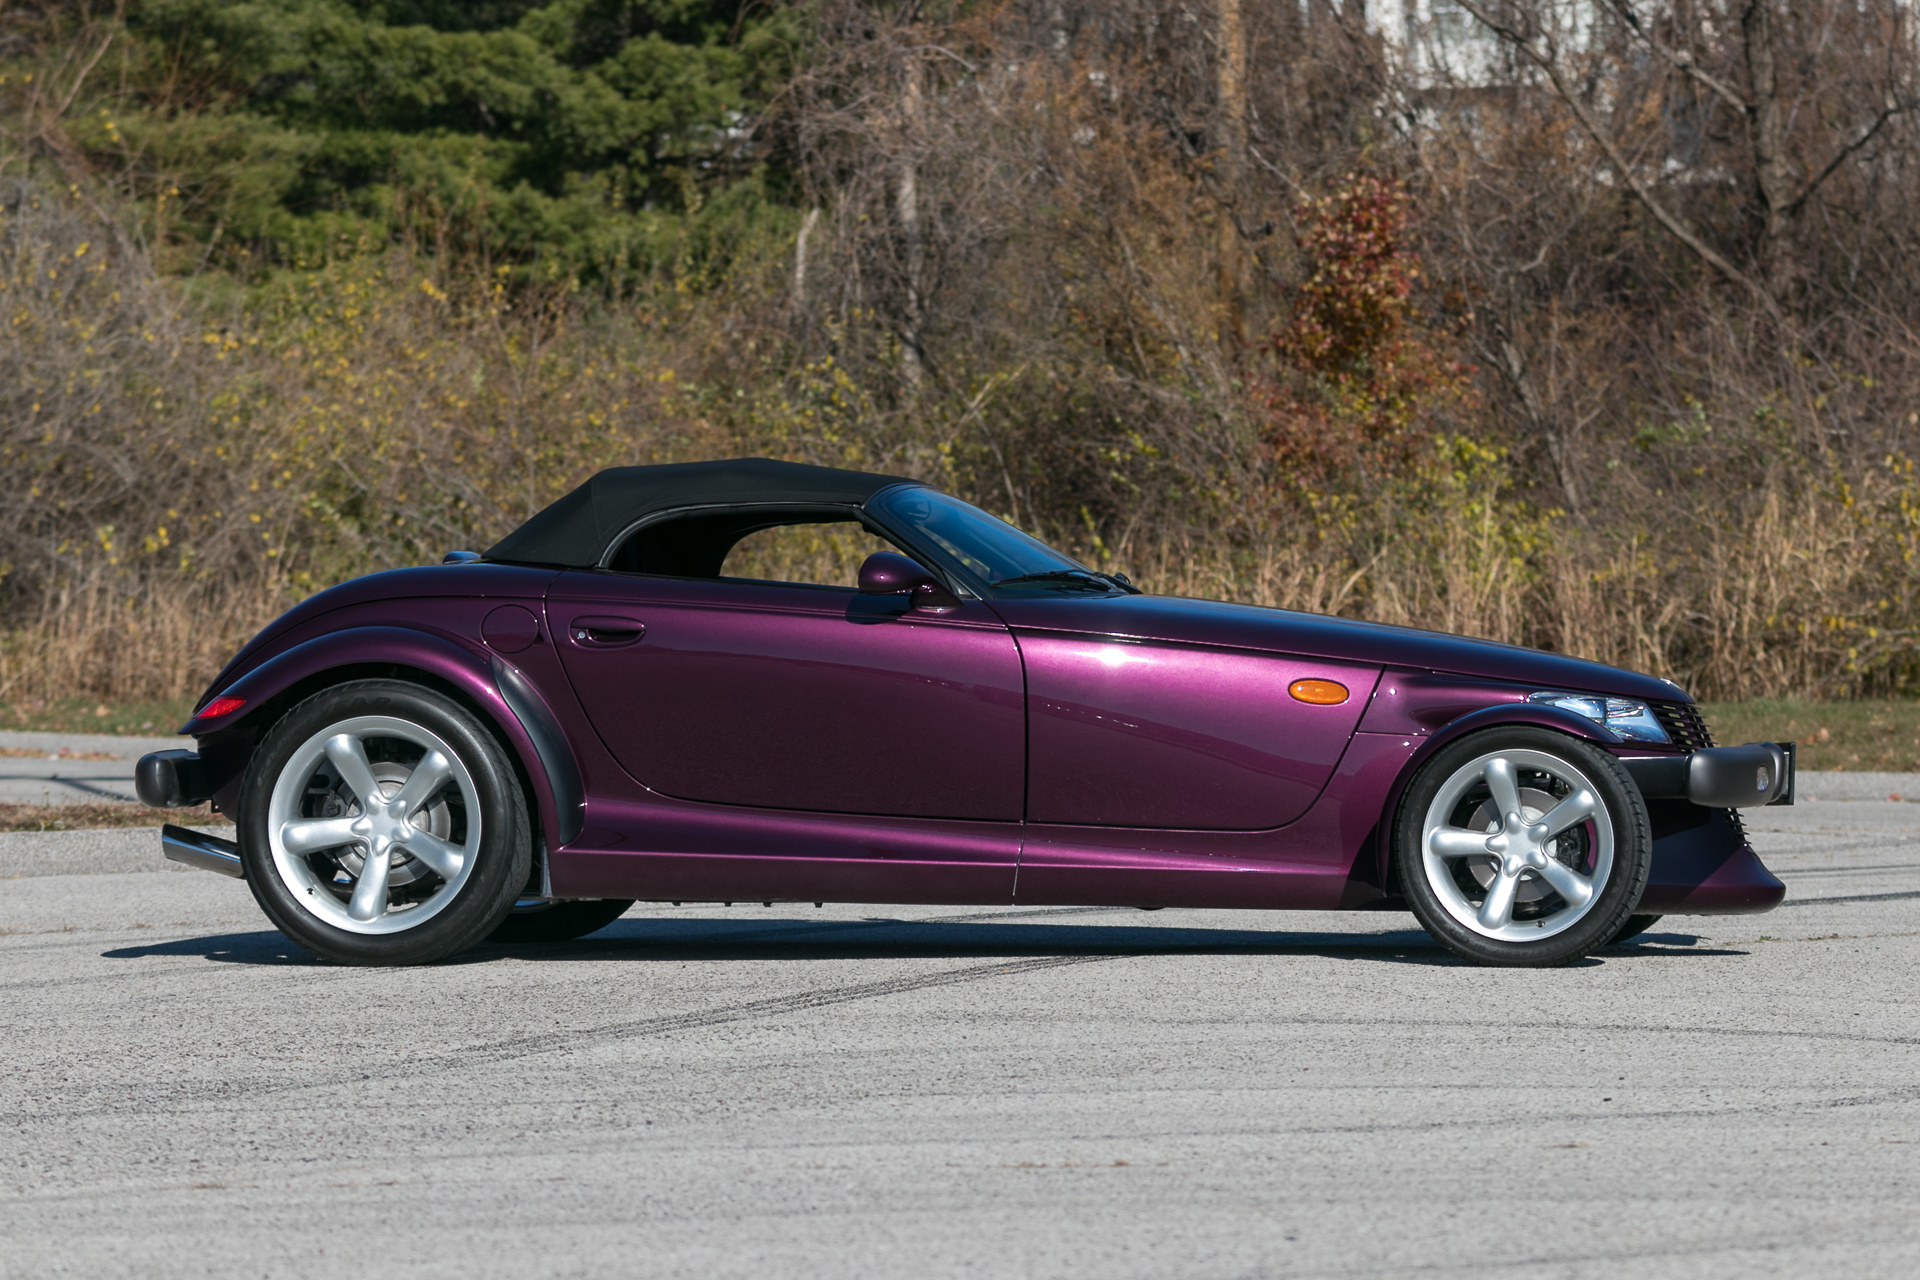 Plymouth Prowler, Striking HD wallpapers, Impressive performance, Automotive excellence, 1920x1280 HD Desktop